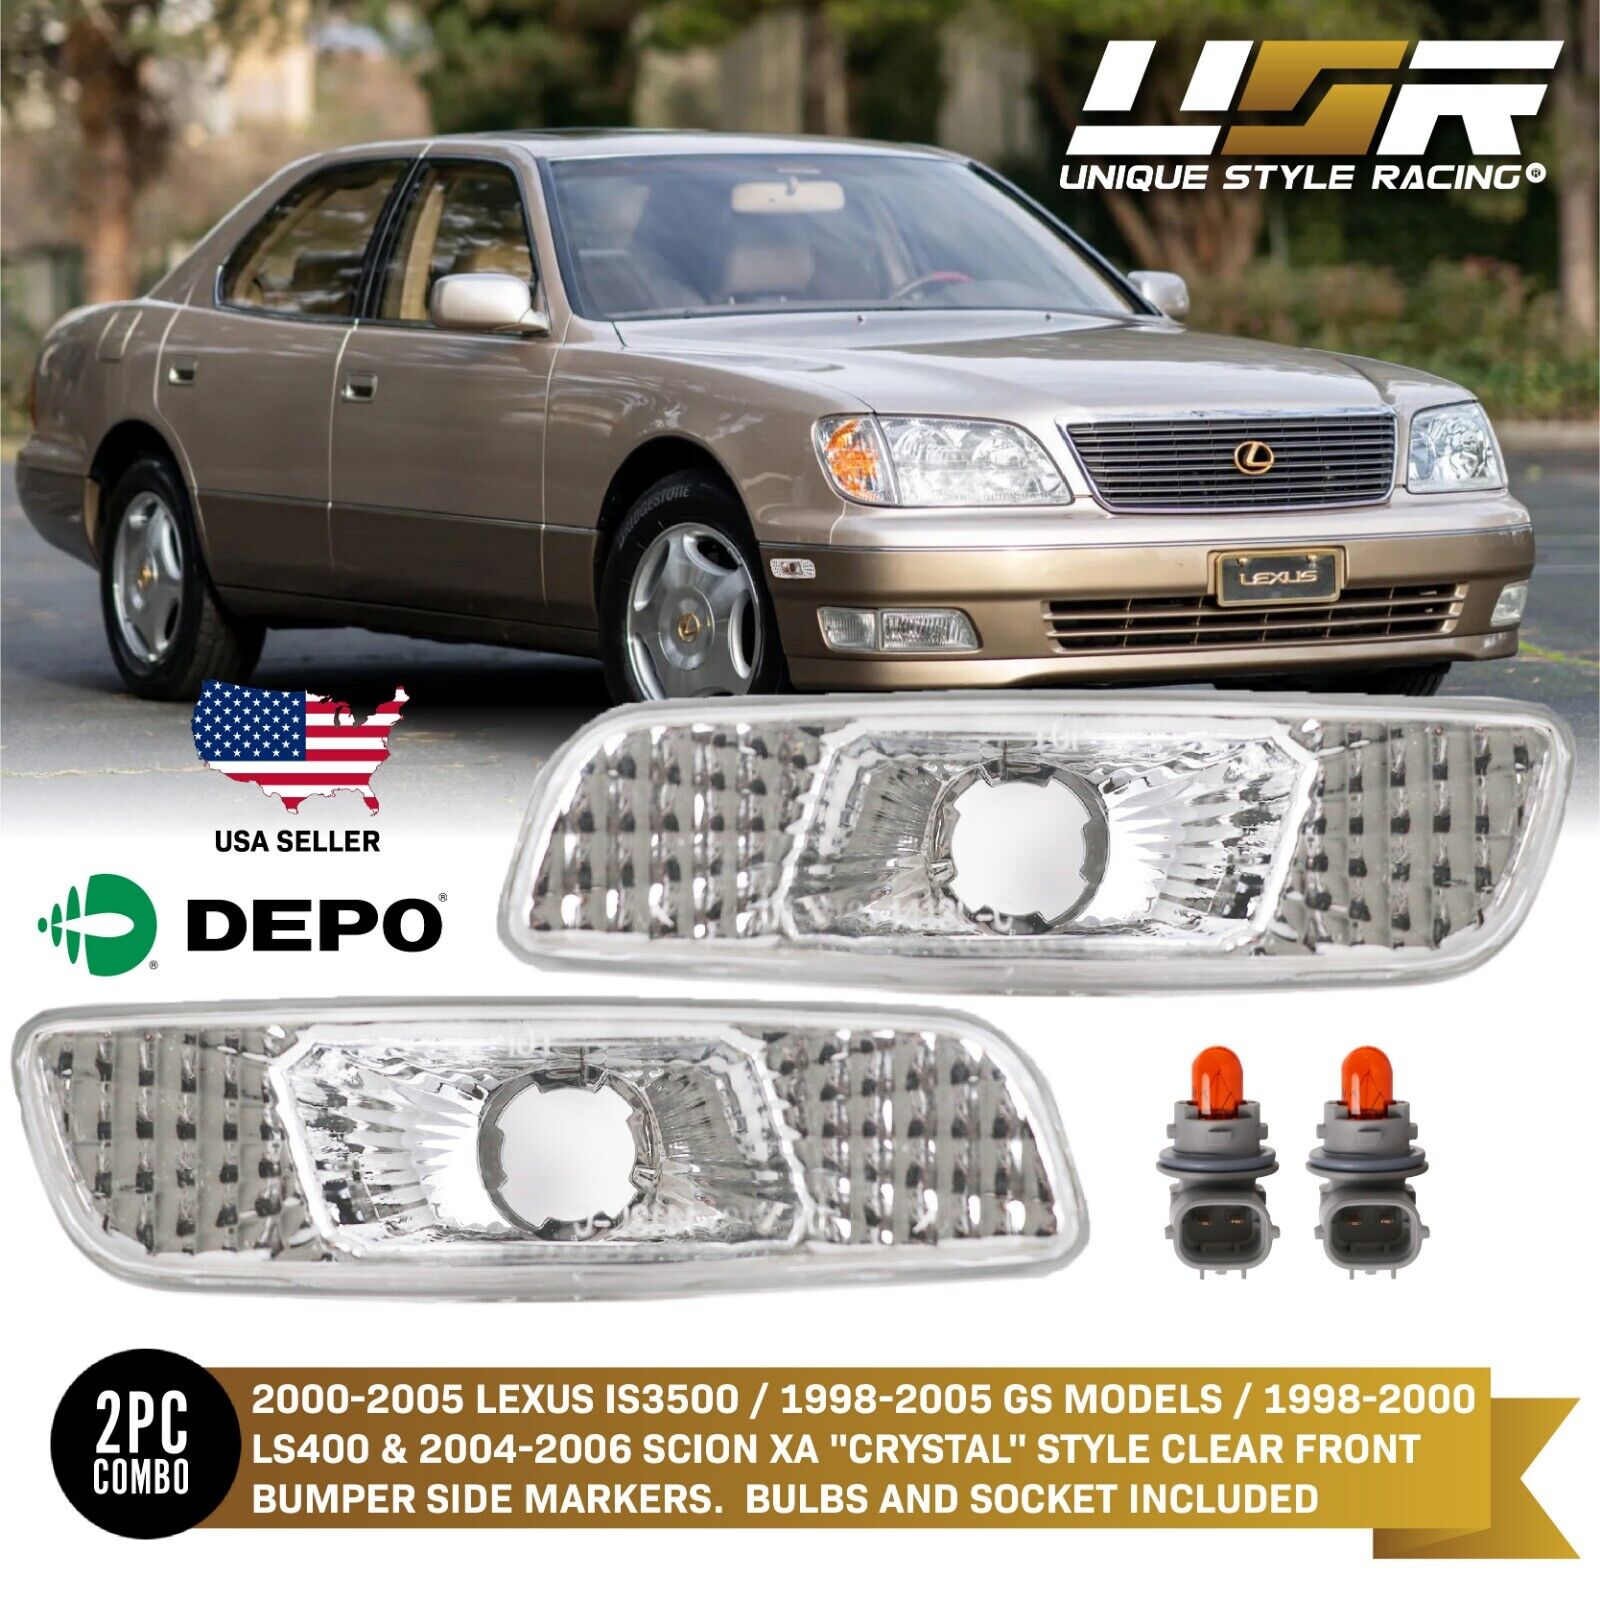 DEPO Front Clear Bumper Side Markers Fit For 1998-2000 Lexus LS400 01-05 IS300